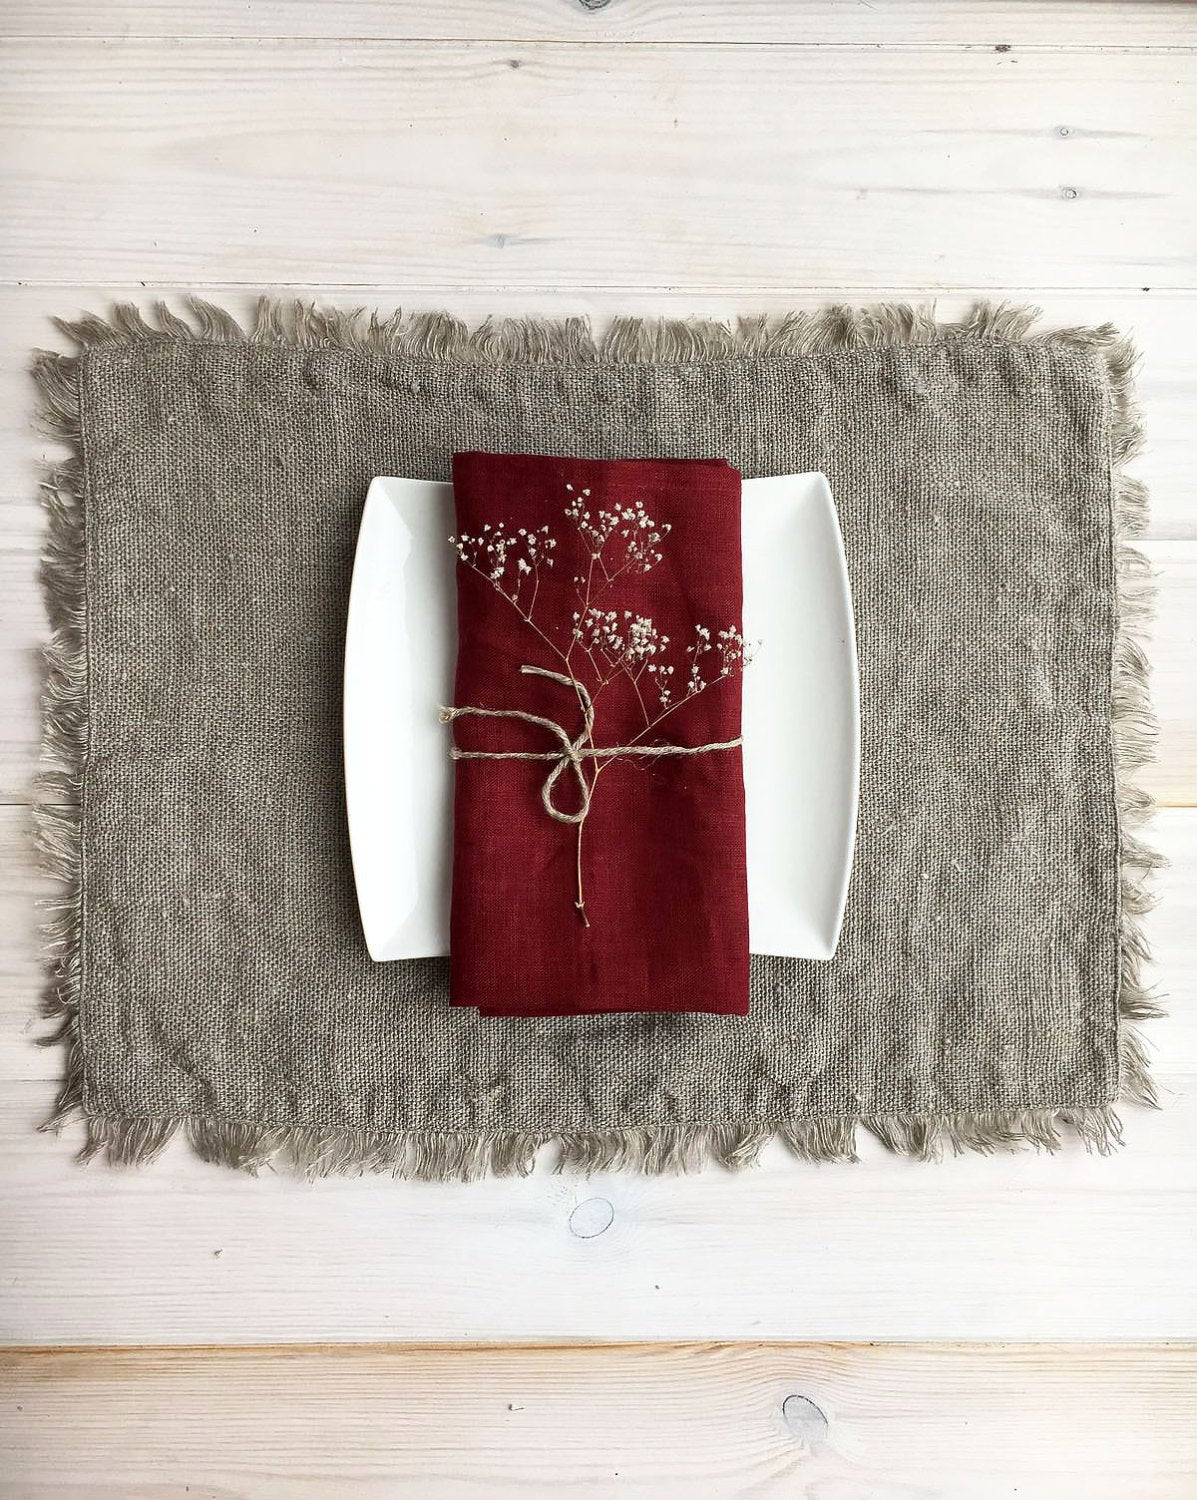 Linen Placemats and Cloth Napkins, Set of Placemats and linen napkins -  Linenbee